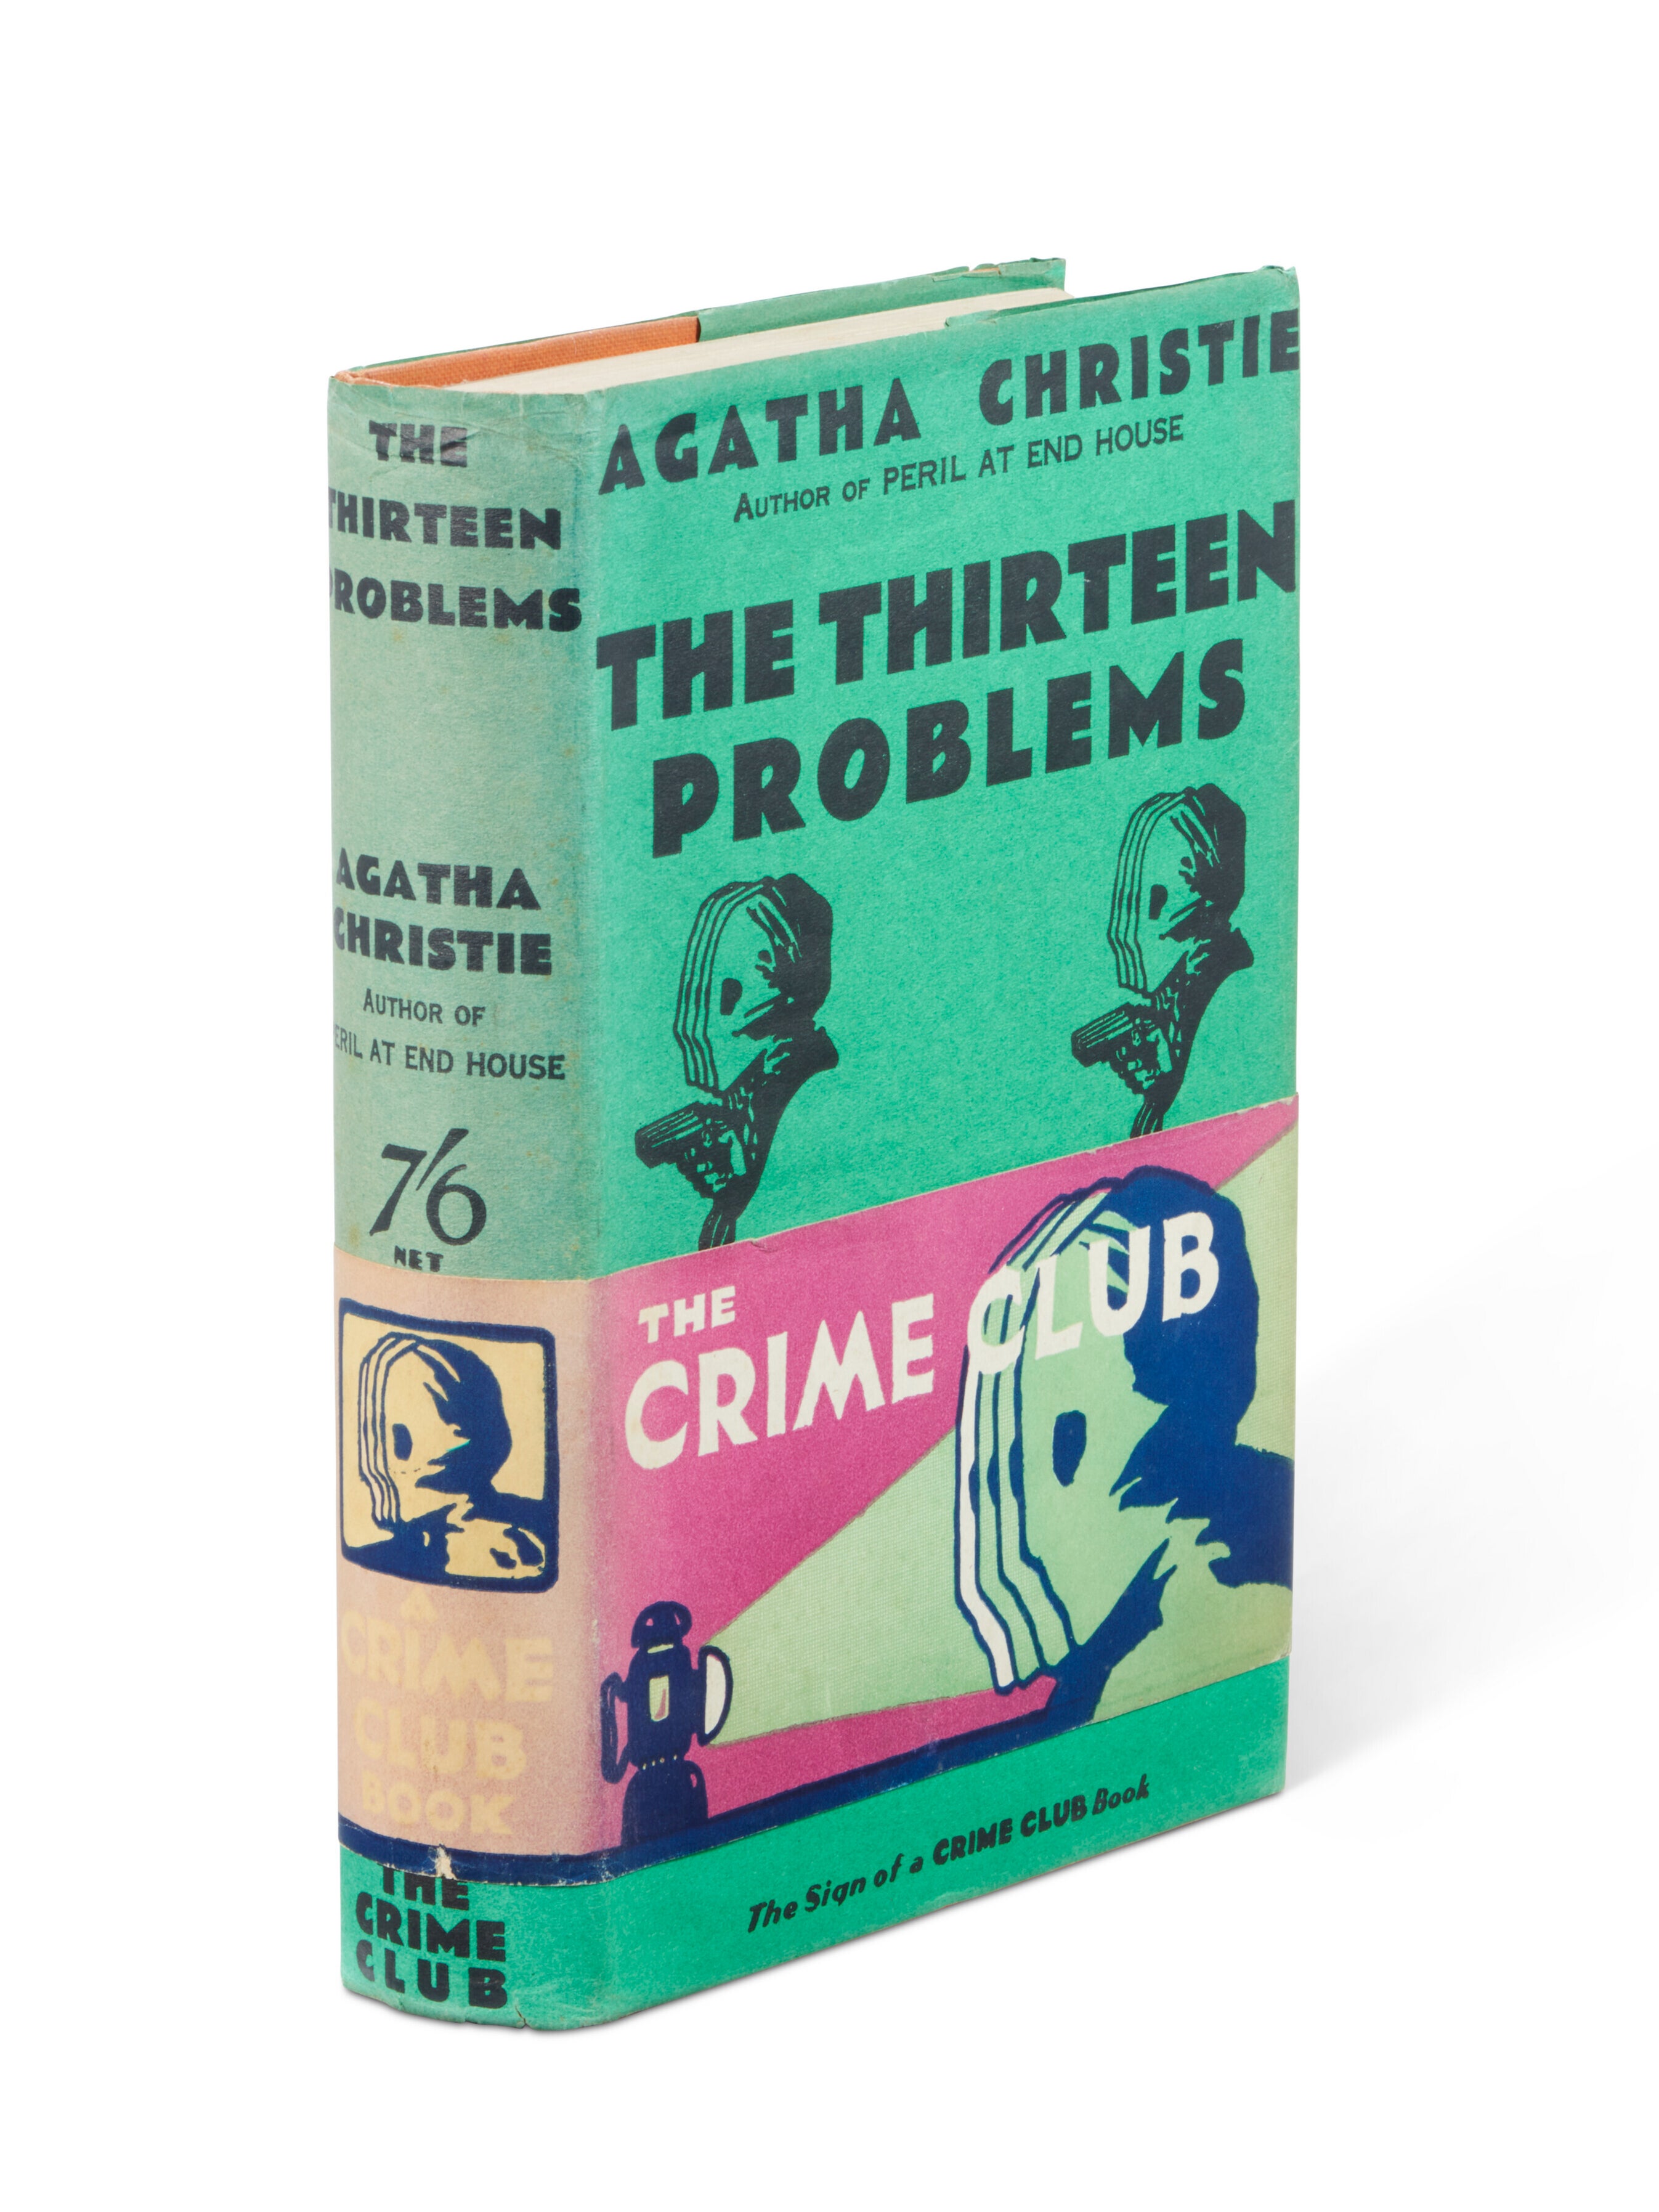 A first edition of ‘The Thirteen Problems’ by Agatha Christie